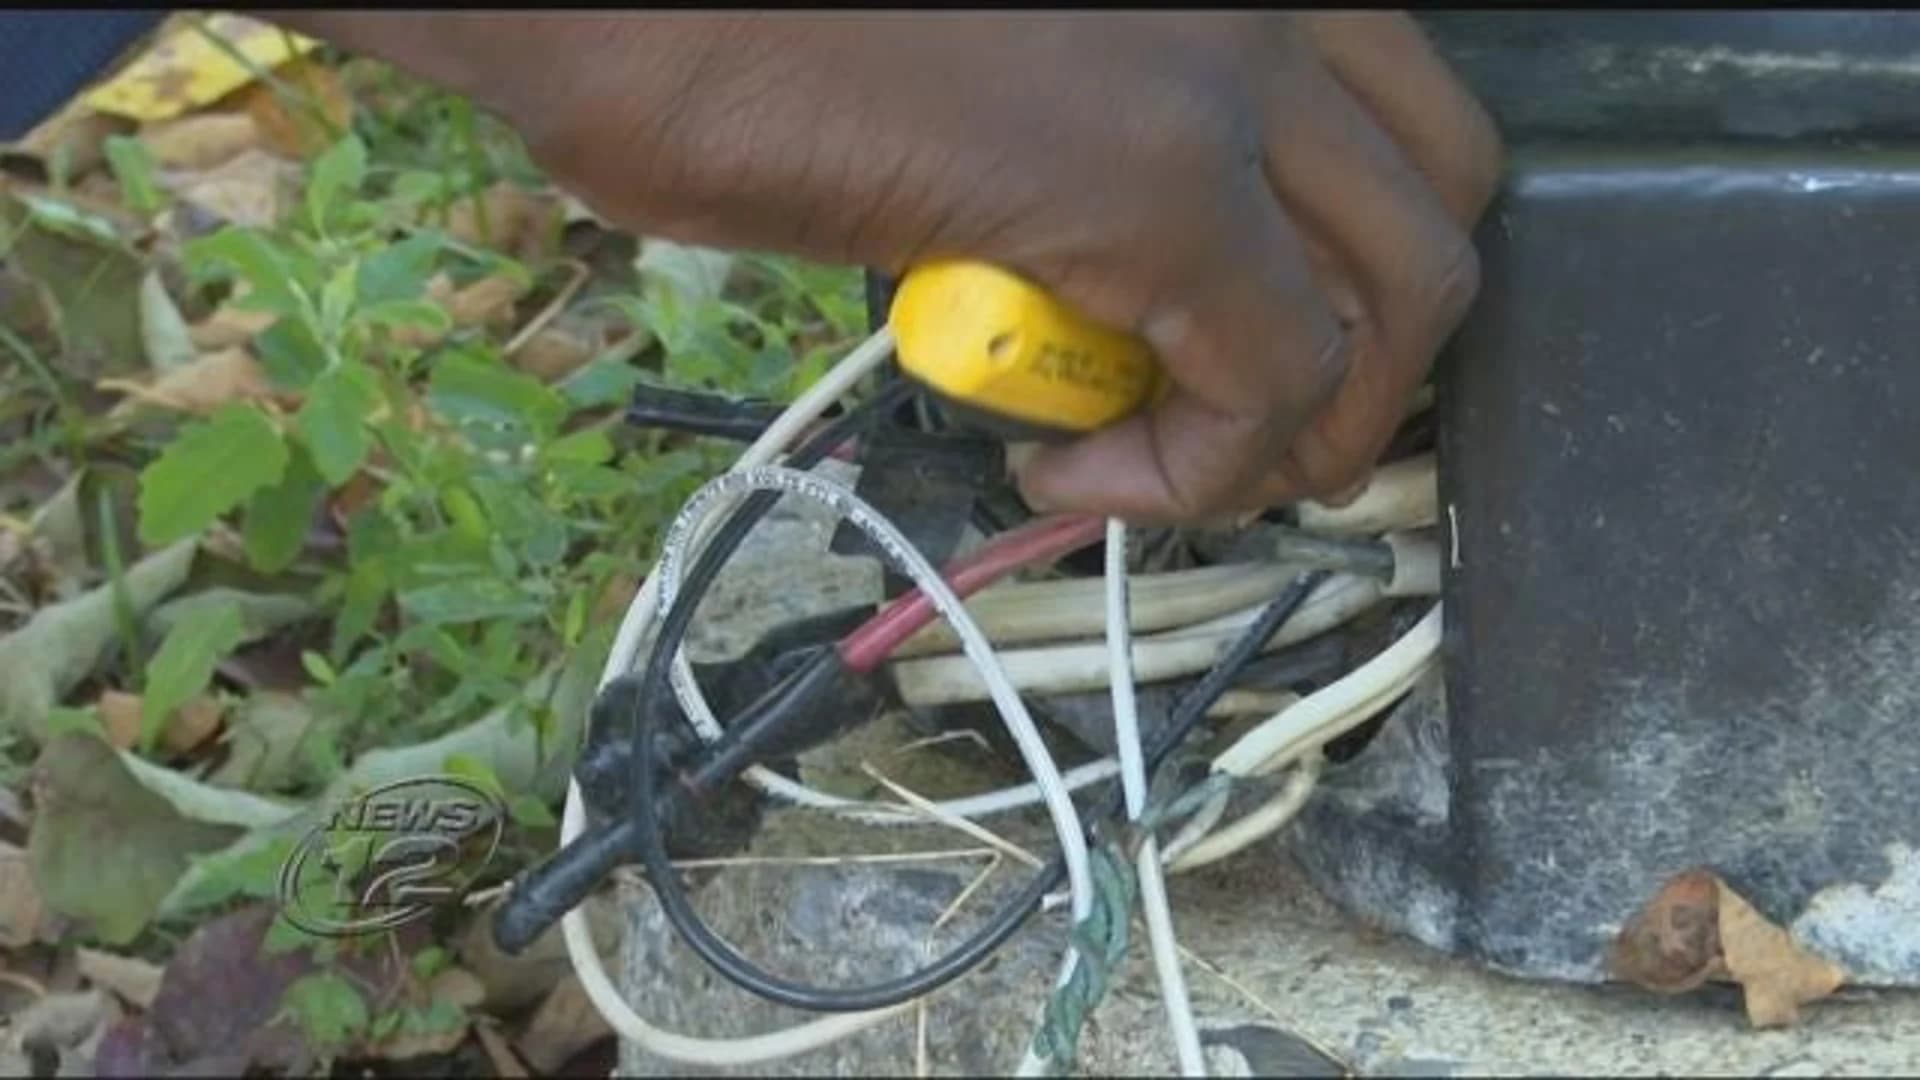 Mount Vernon electrician: City is allowing exposed wires to go unfixed in park